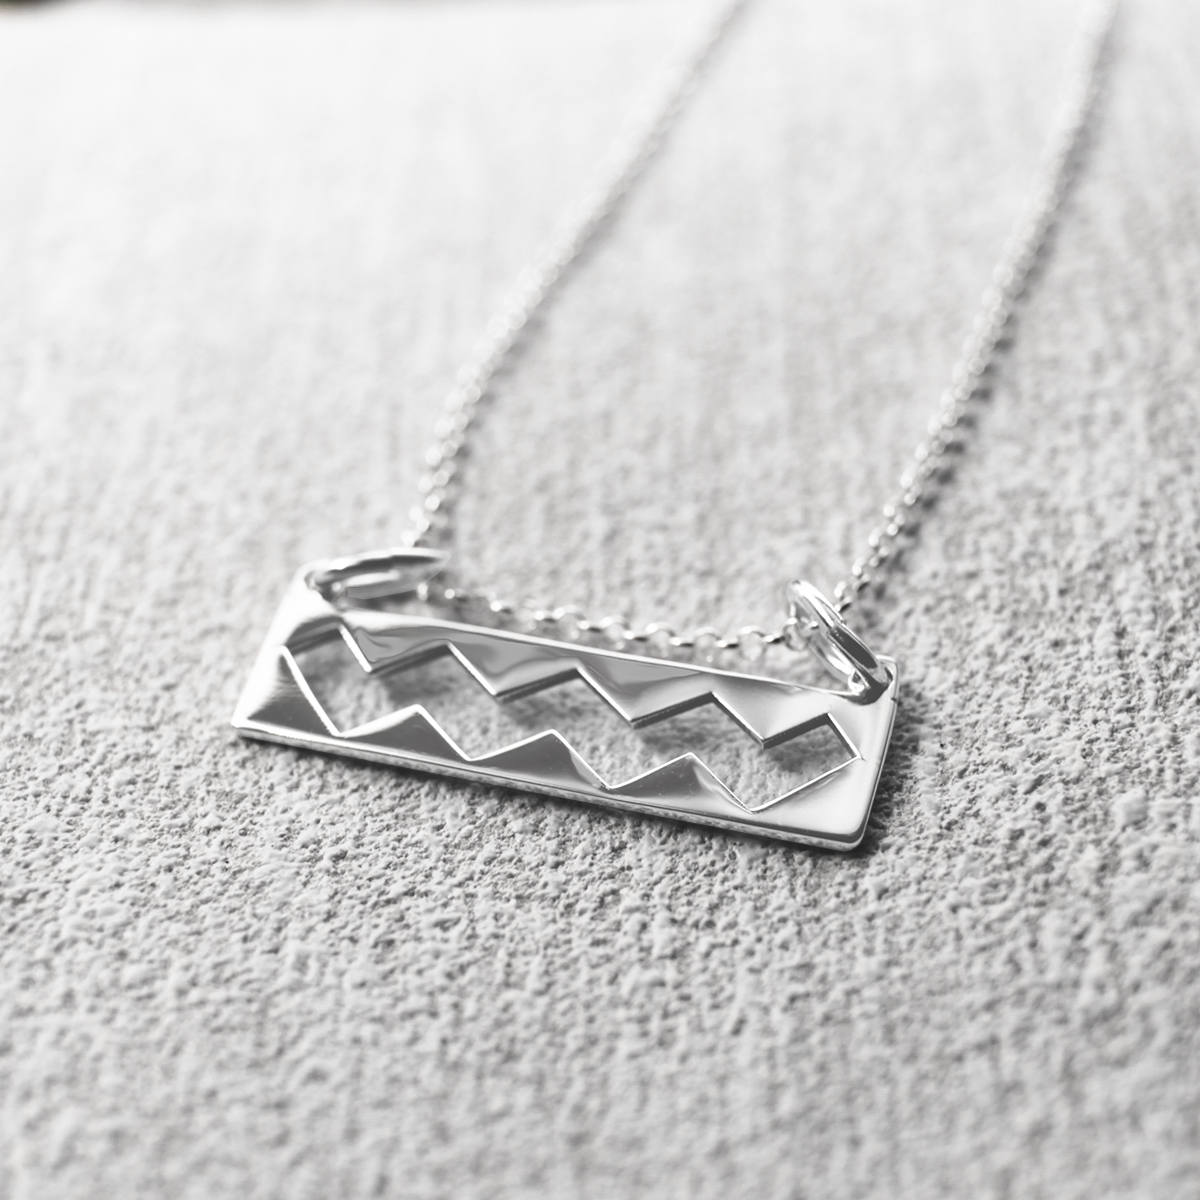 Experience the majestic beauty of Ireland with the EIRE - Wild Atlantic Way Silver Pendant. This stunning piece boasts dimensions of 25mm in width and 6mm in height, with a measurement of 12mm from the top of the bails. Its bail is designed to fit up to a 2.5mm chain. Included with the pendant is a 1.4 mm sterling silver belcher Rolo chain, available in various lengths to suit your style preference, whether you prefer it short or long. Irish gift